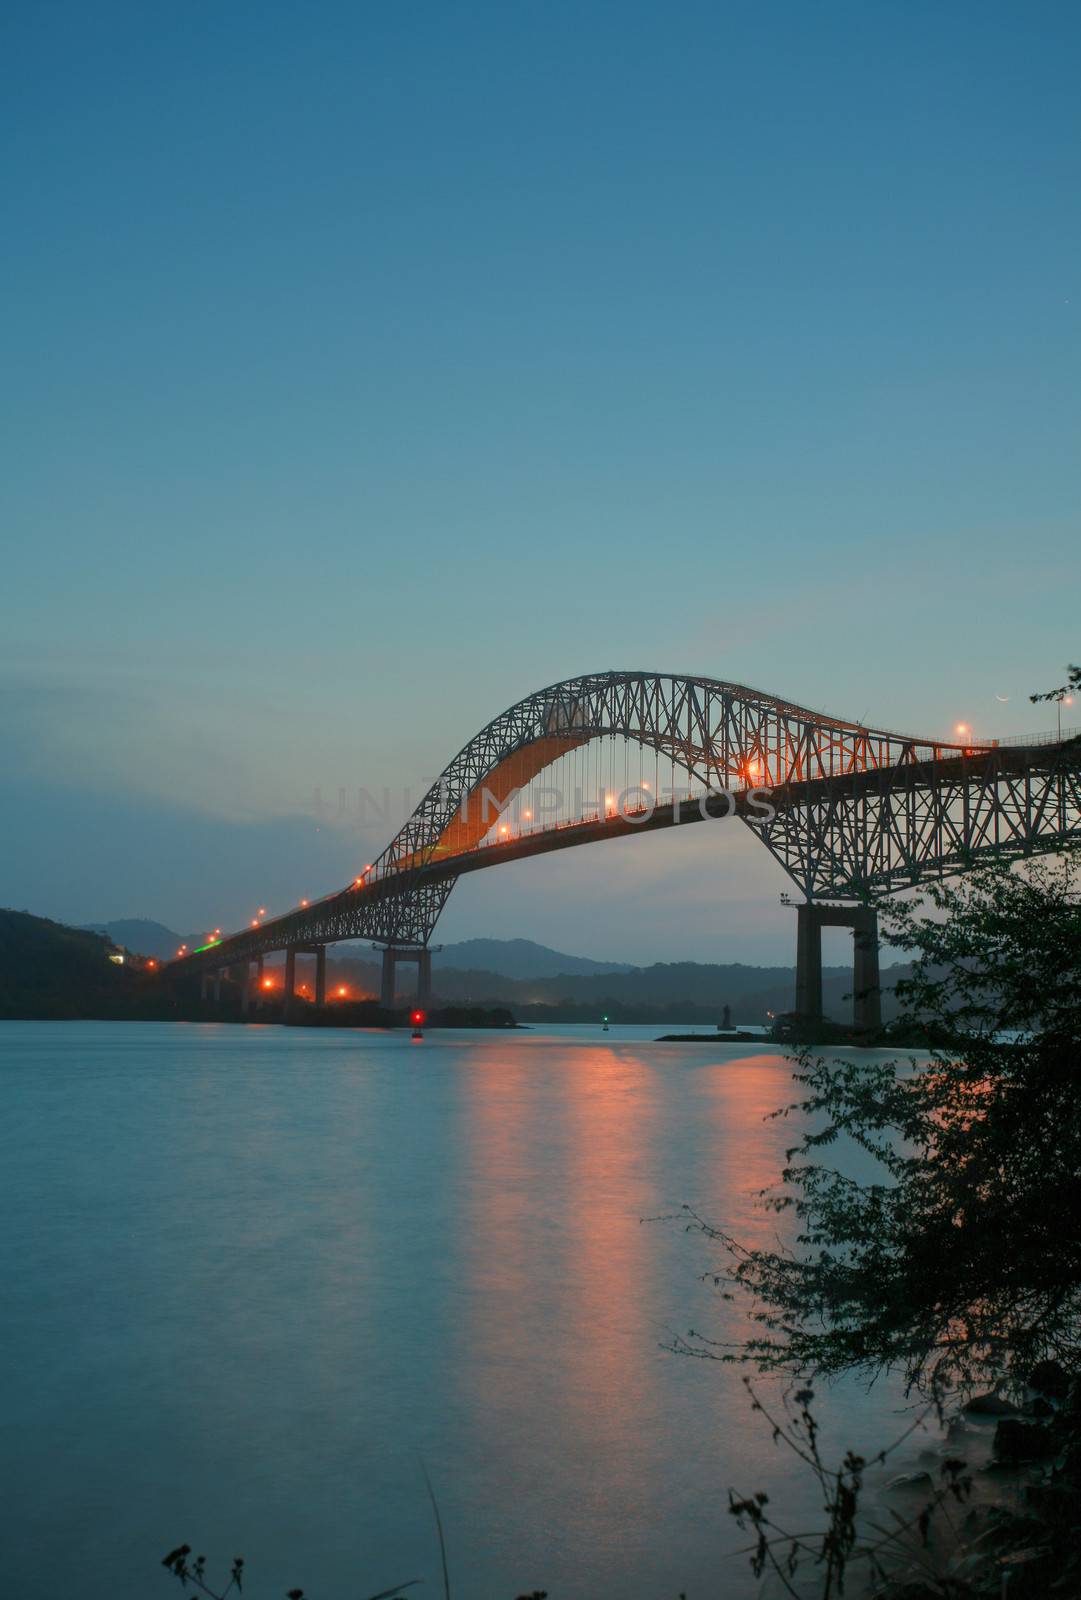 Trans American bridge in Panama connected South and North Americ by dacasdo